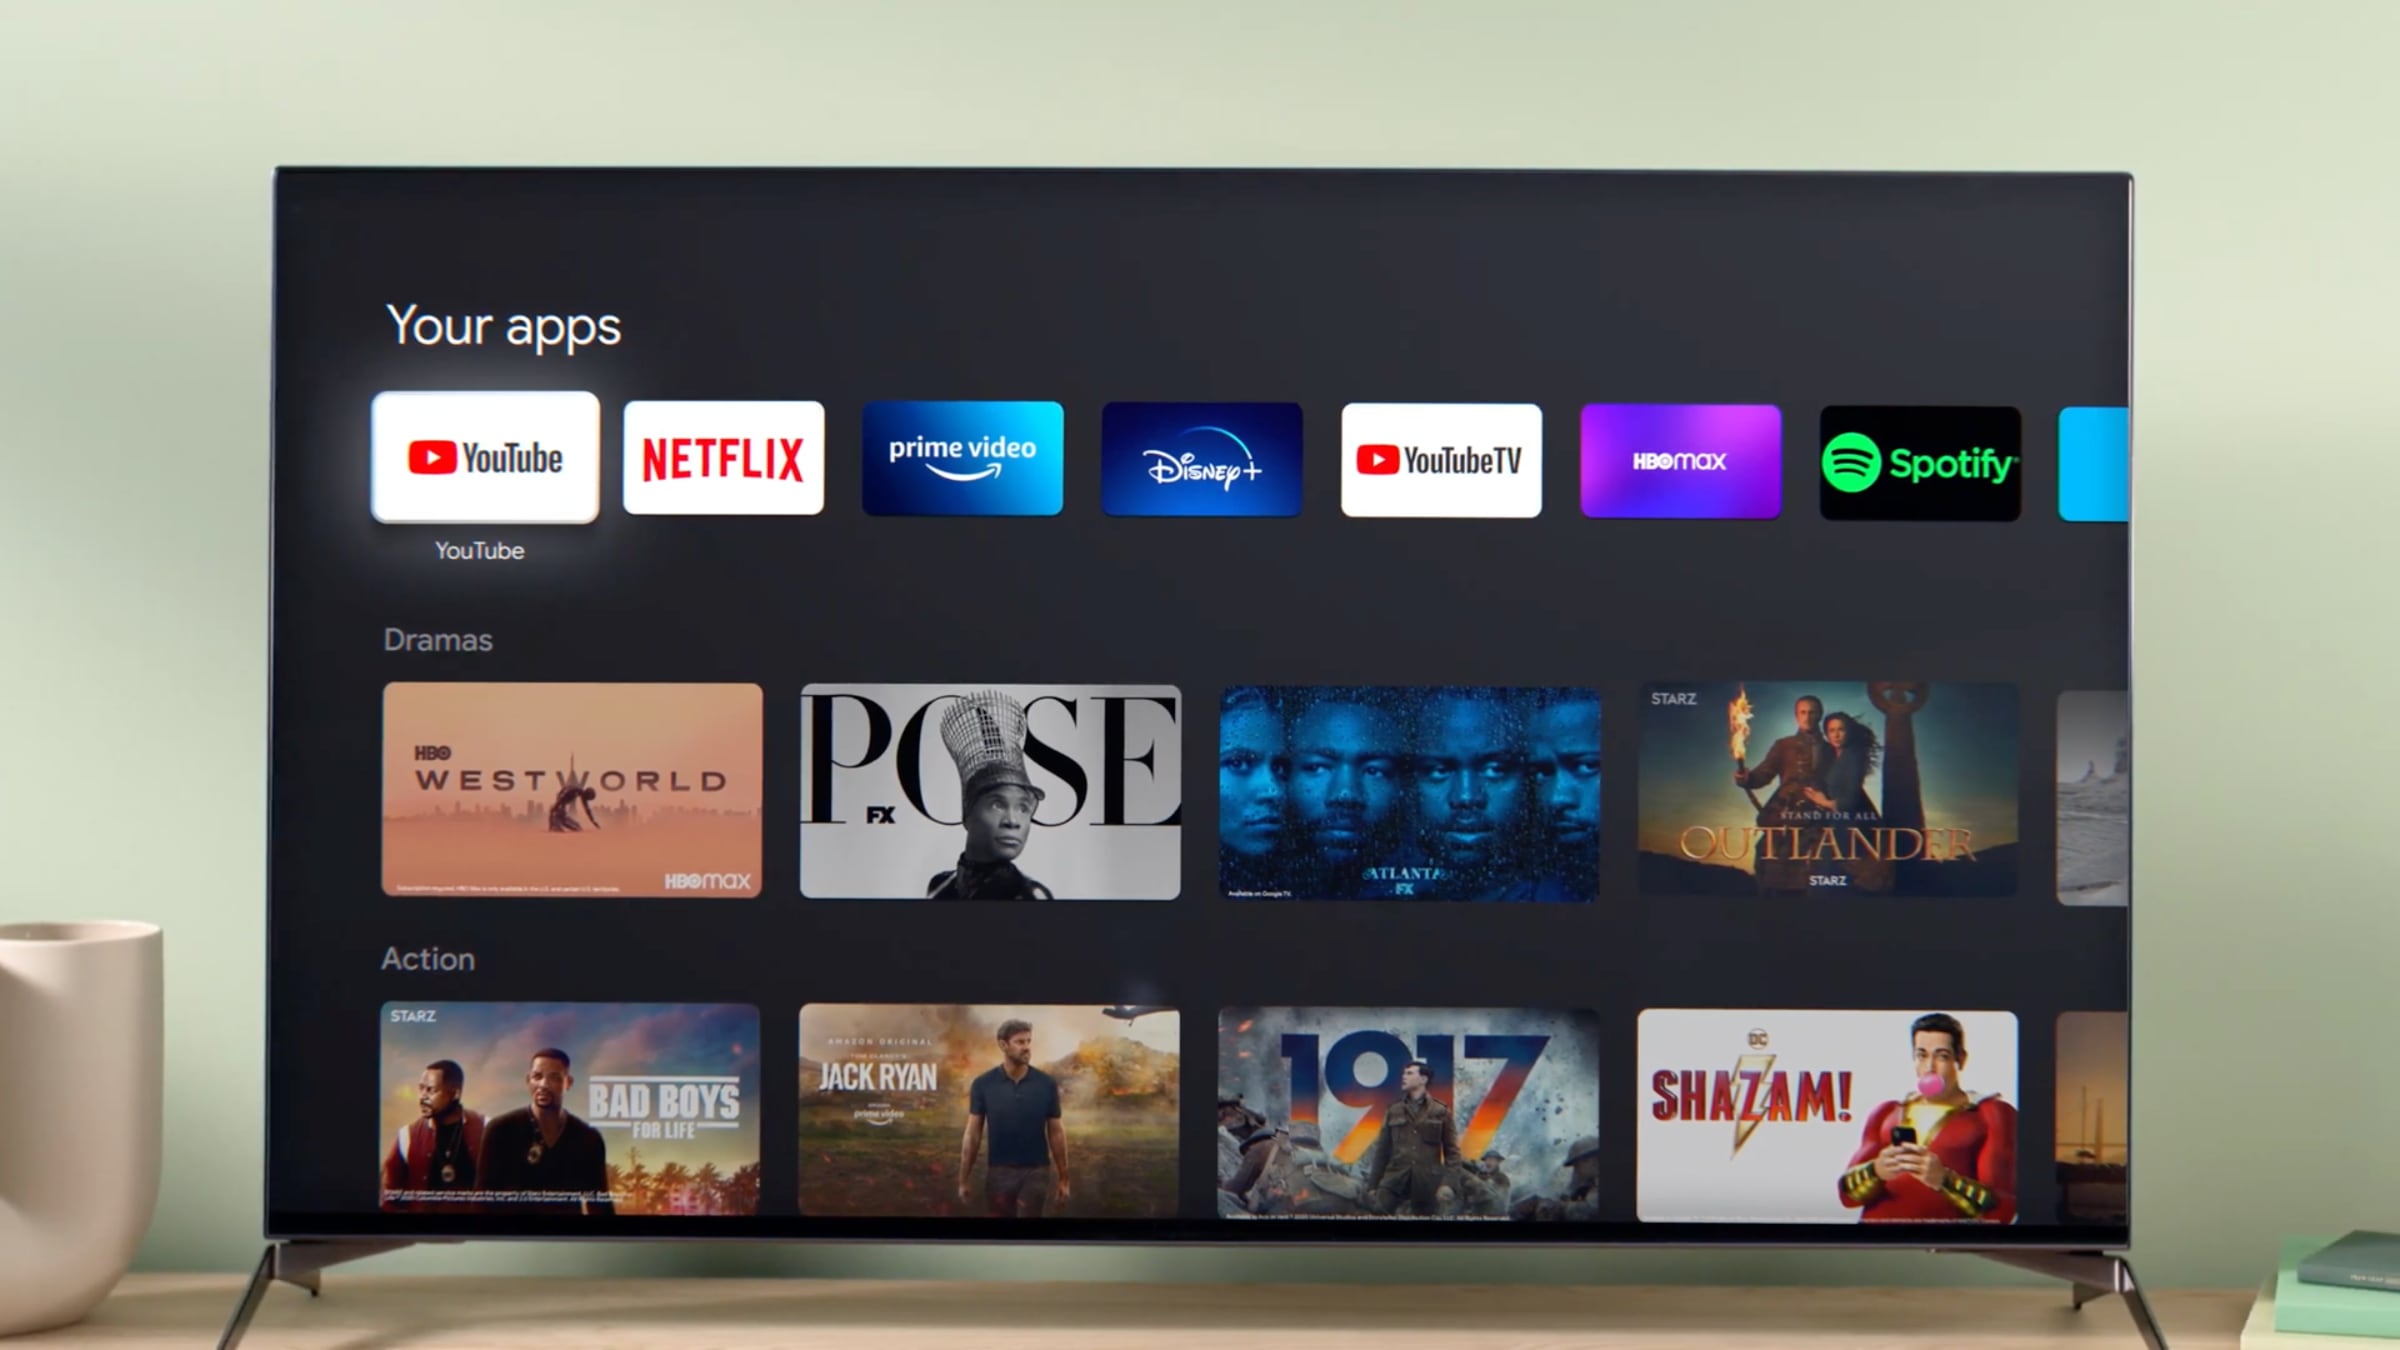 TV app coming to Android TV, Chromecast with Google TV - FlatpanelsHD